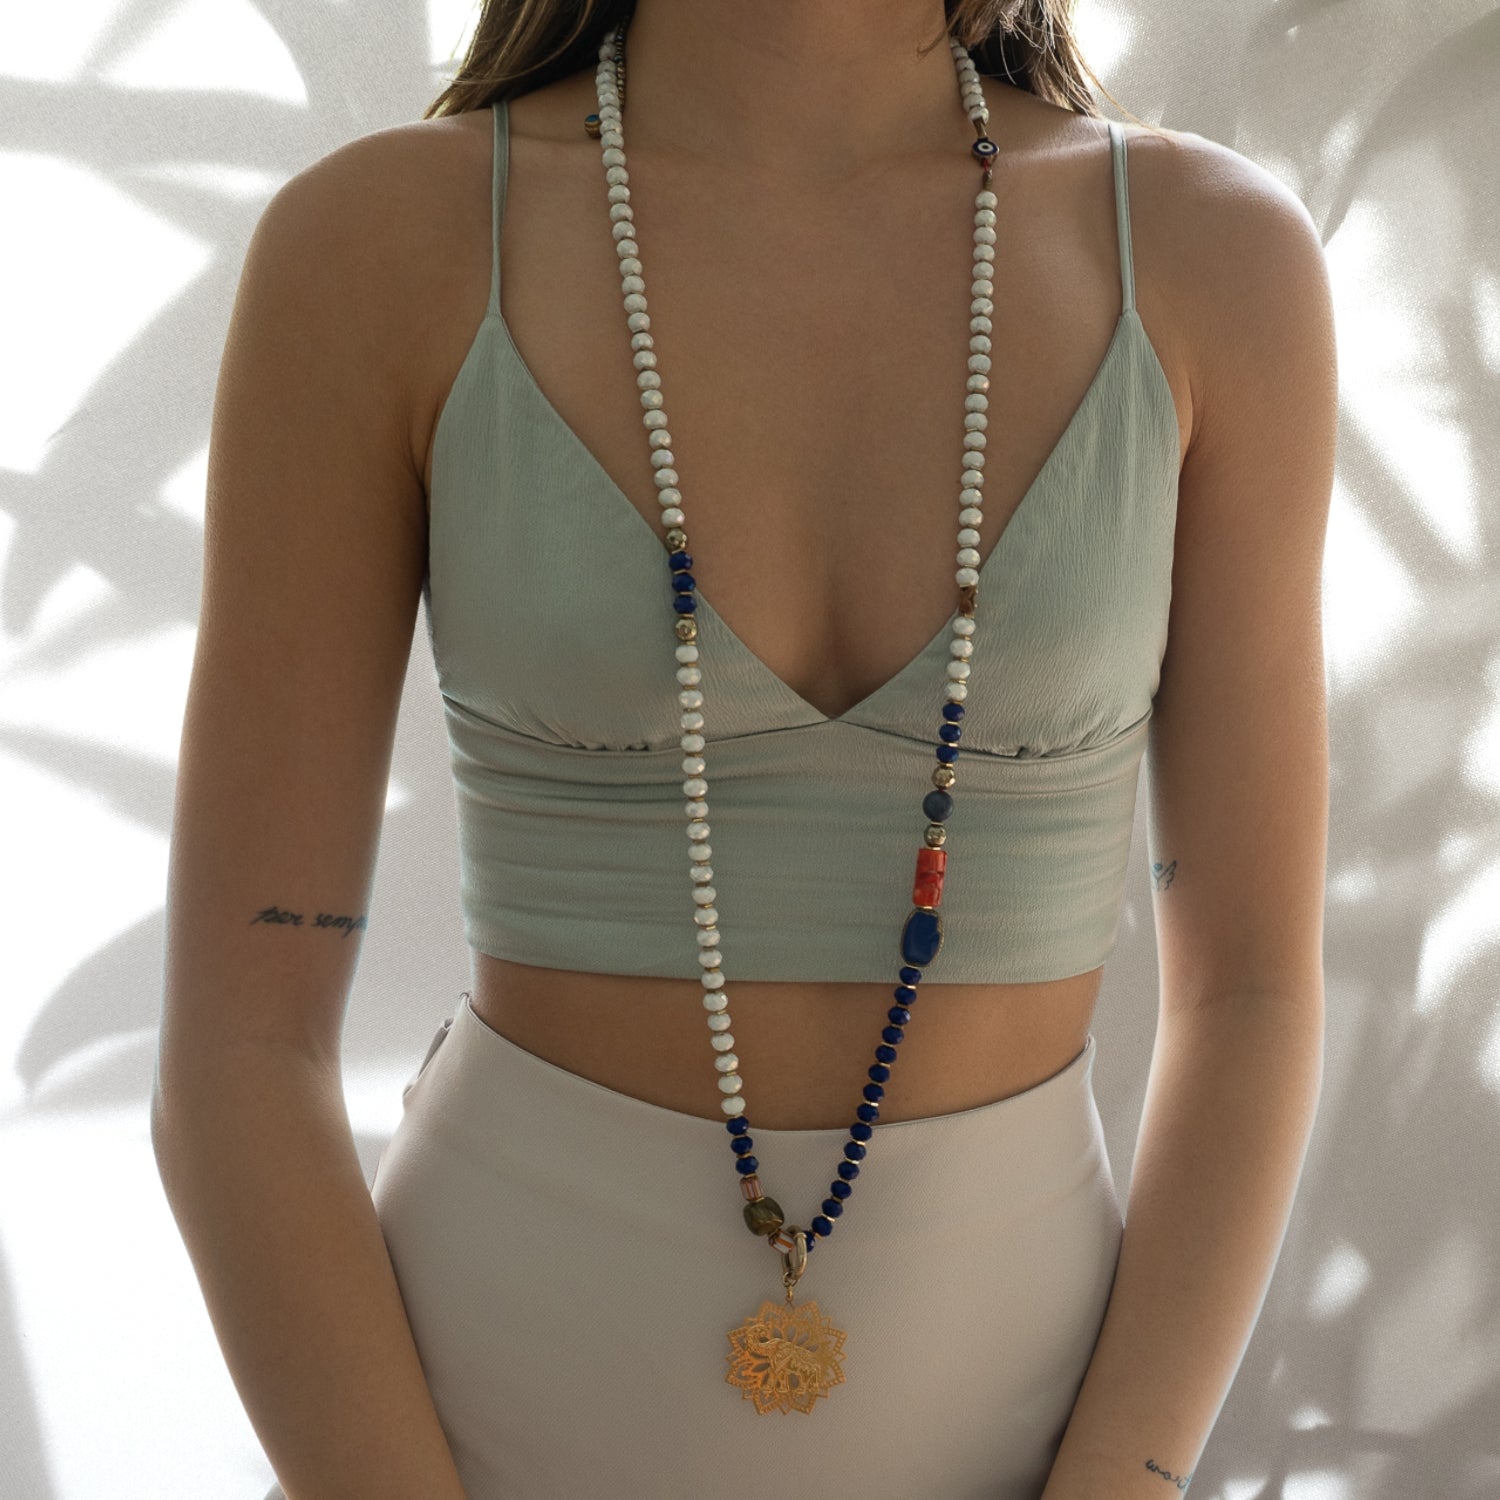 The model showcases the beauty and spirituality of the Spiritual Elephant Necklace, radiating positive energy and charm.